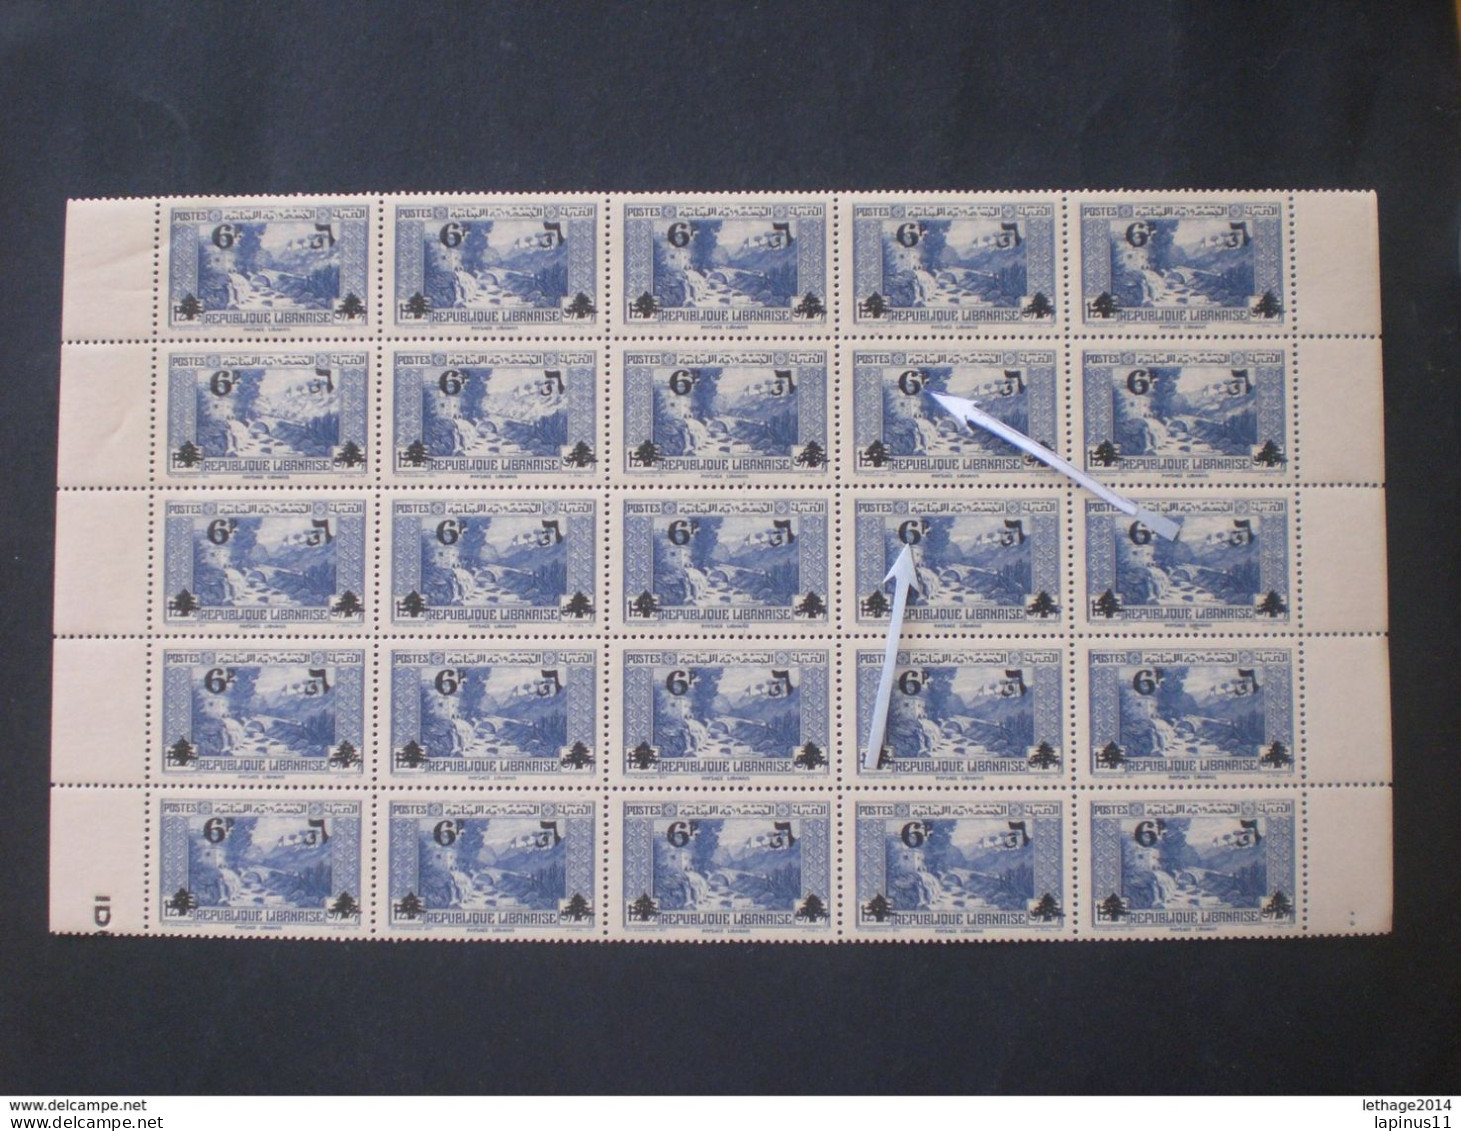 GRAN LIBAN لبنان LEBANON 1943 TIMBRES DE 1937-40 SURCHARGES YVERT N. 185 MNH ERRORE Incomplete Print Of Number 6 - Liban